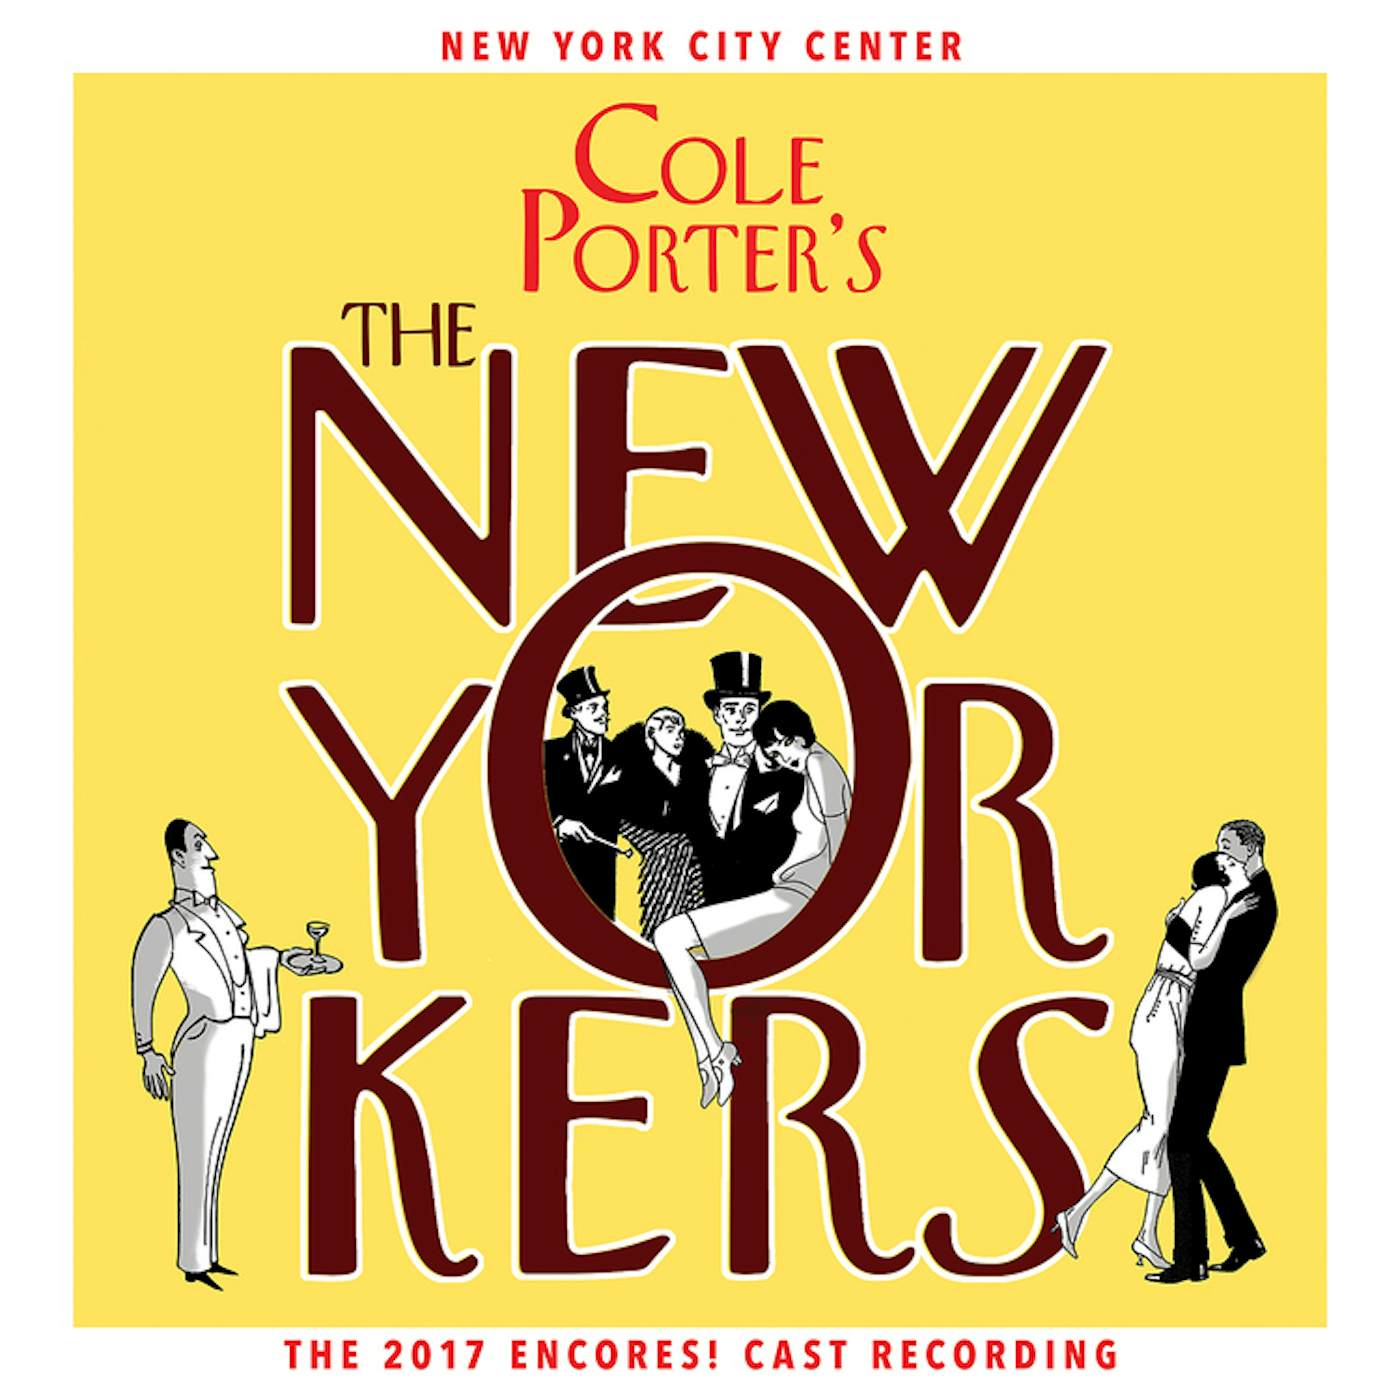 COLE PORTER'S THE NEW YORKERS CD